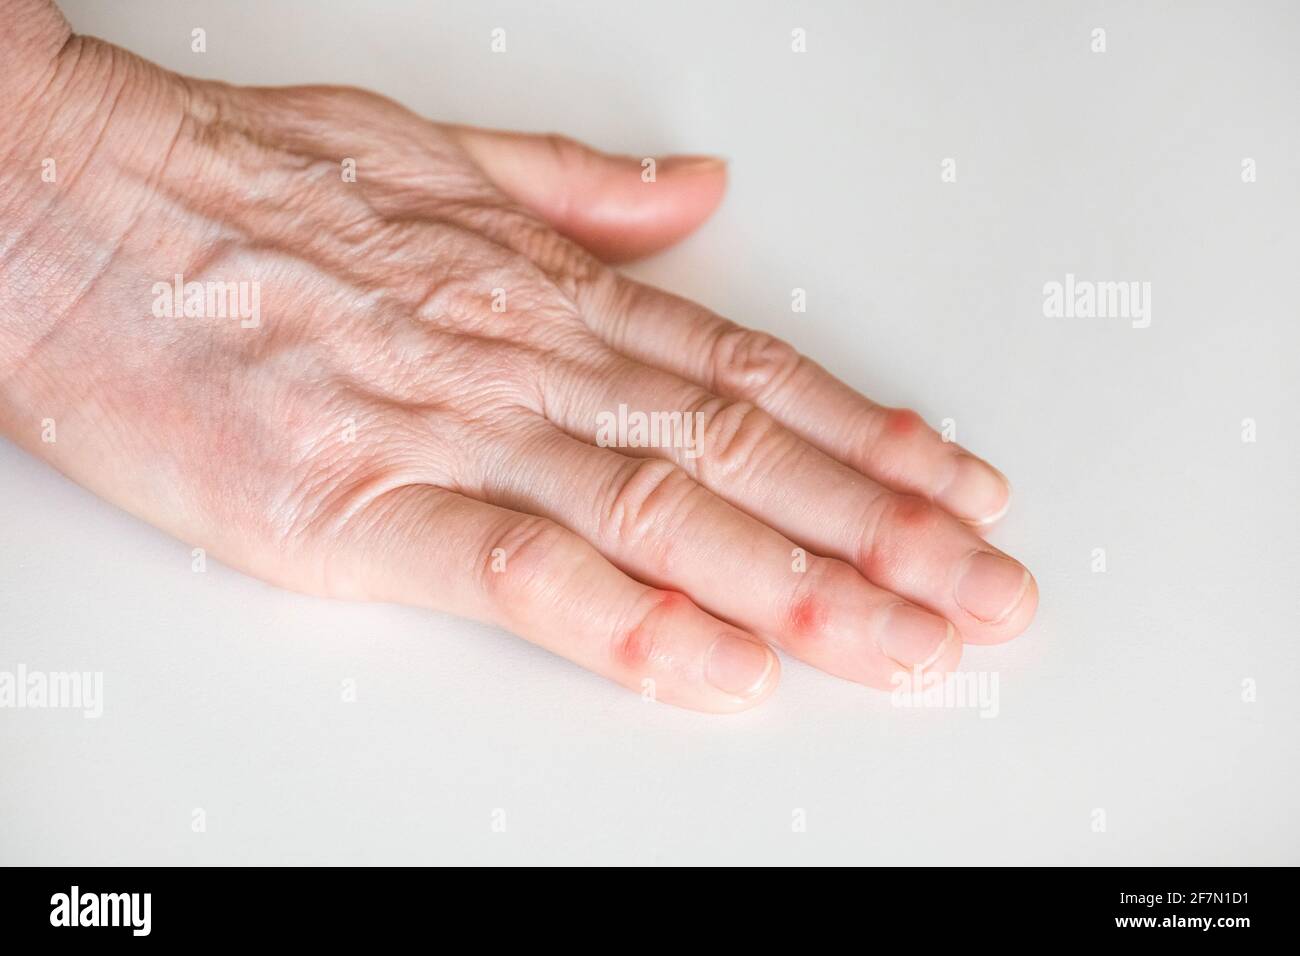 Sick female fingers of an elderly man's hand on a white background. Stock Photo